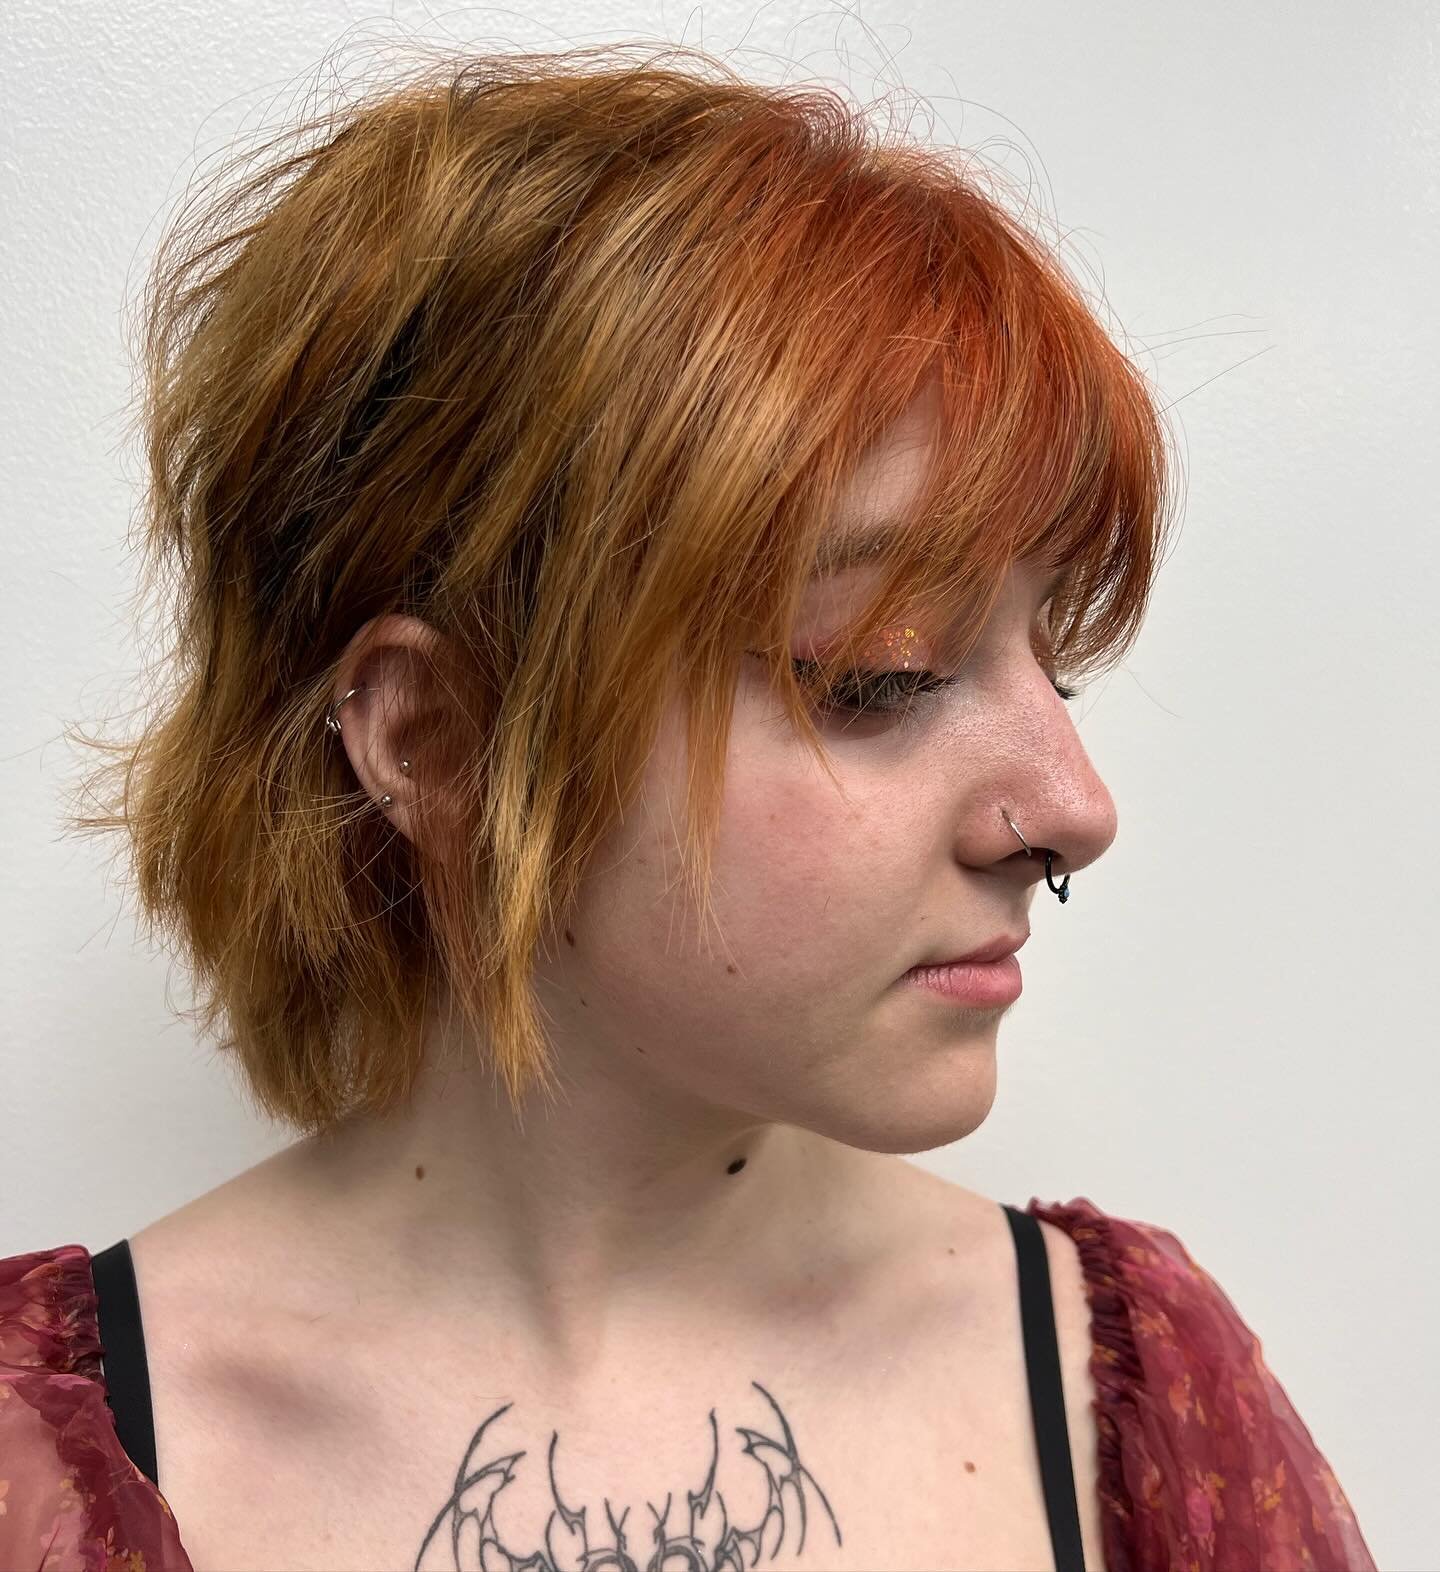 Obsessed with this cut I did on @littleflowerbab!!🖤
-
-
-
-
-
-
-
Spring is a perfect time to freshen up your hair! I&rsquo;m booking into May, claim your spot soon! 
#haircut #hairstylist #althair #shortshag #cosstudent #cosmetology